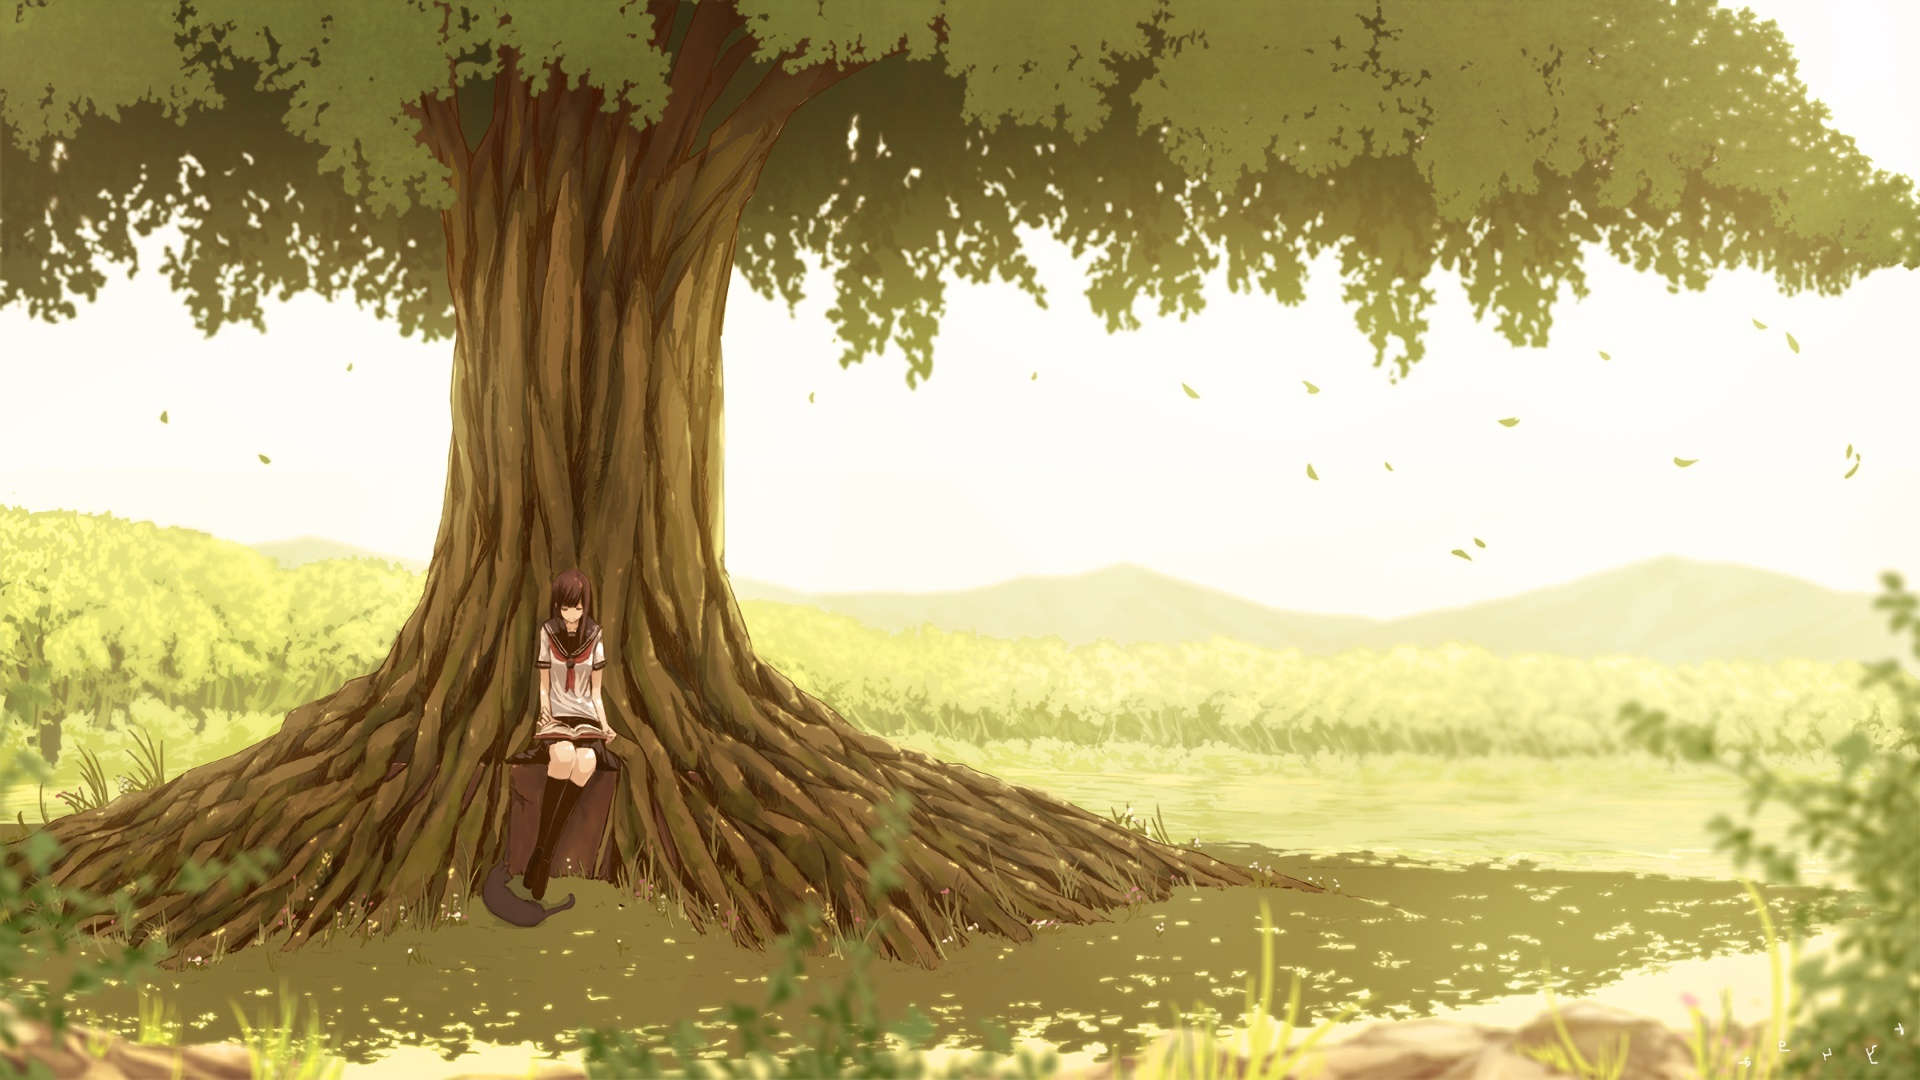 Wallpaper Reading A Book, Scenic, Anime Girl, Landscape, Giant Tree:1920x1080